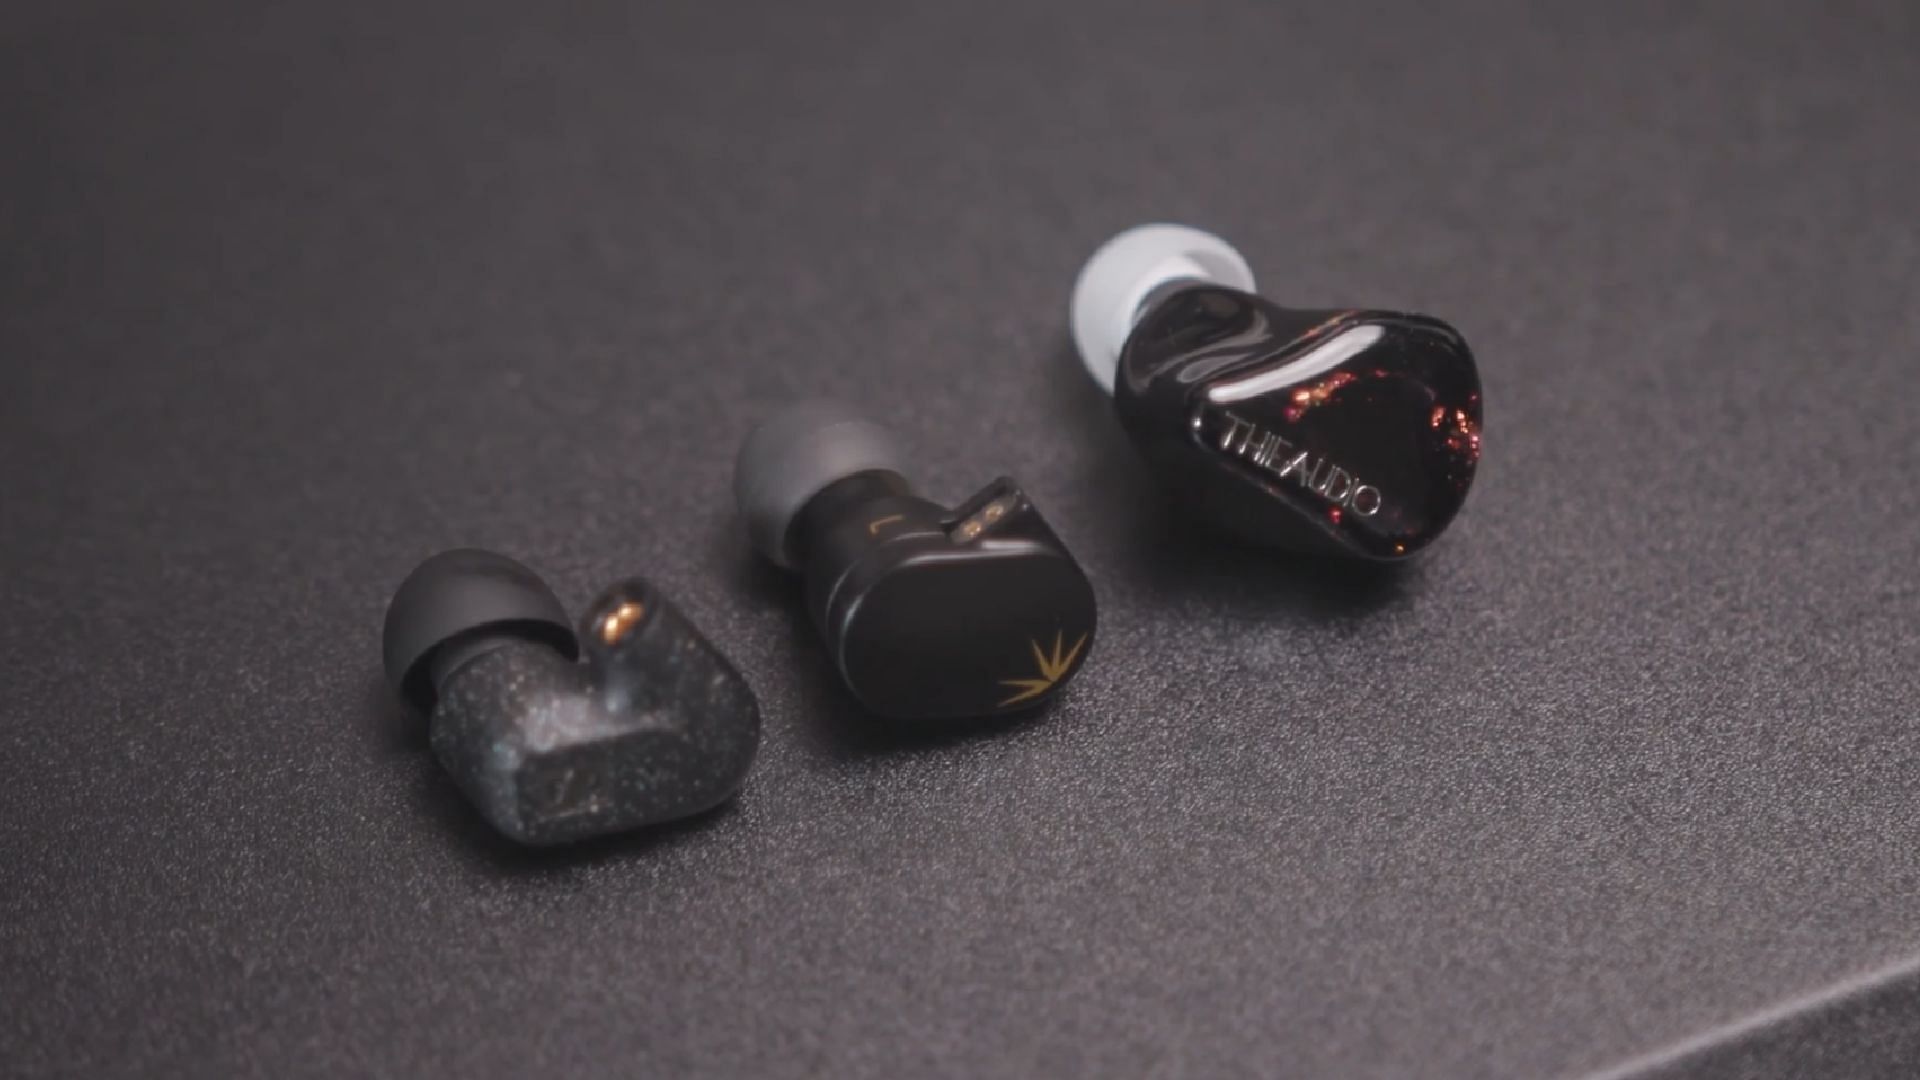 Picture of three IEM earbuds on a table